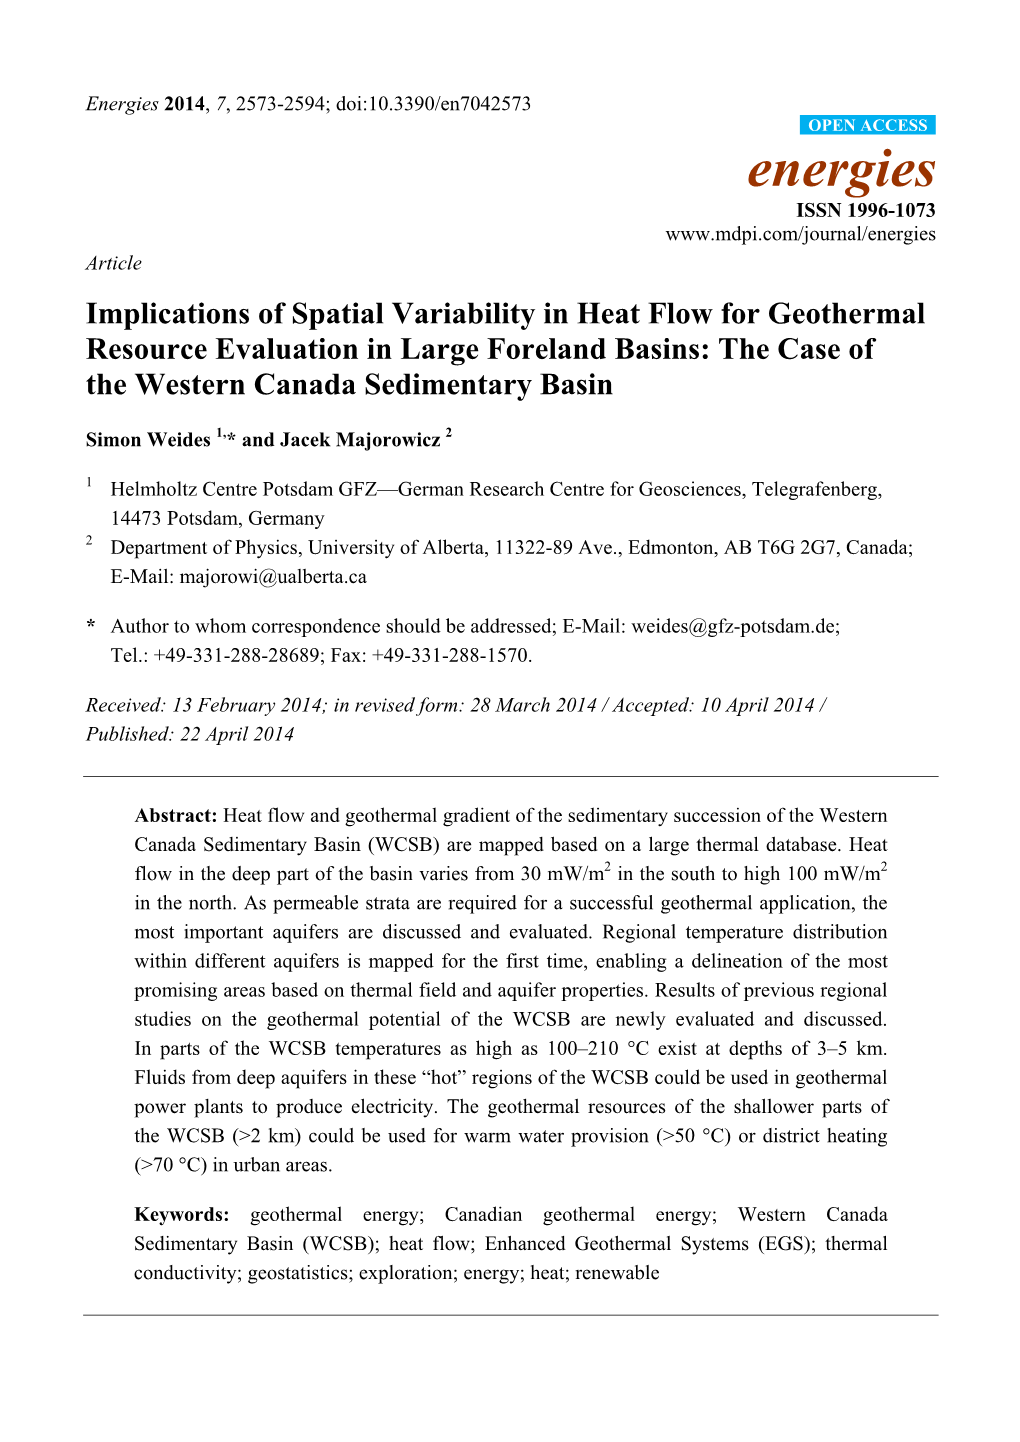 Implications of Spatial Variability in Heat Flow for Geothermal Resource Evaluation in Large Foreland Basins: the Case of the Western Canada Sedimentary Basin